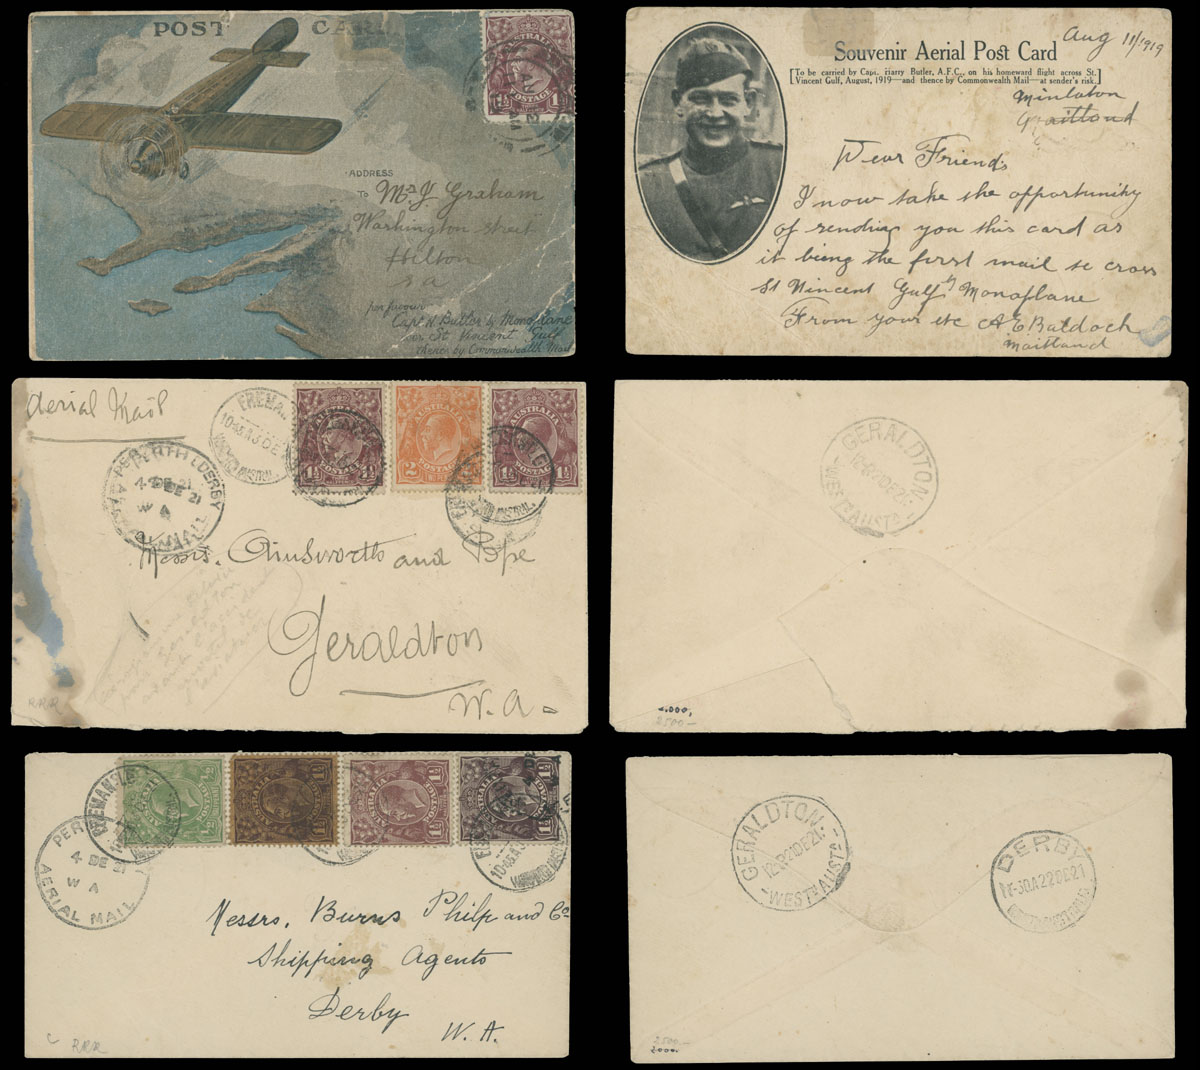 Lot 7 - 1. Worldwide Air Post Stamps and Postal History Australia -  Raritan Stamps Inc. Auction #93 Worldwide Air Post stamps and postal history, Zeppelin Flight items, philatelic rarities of the World